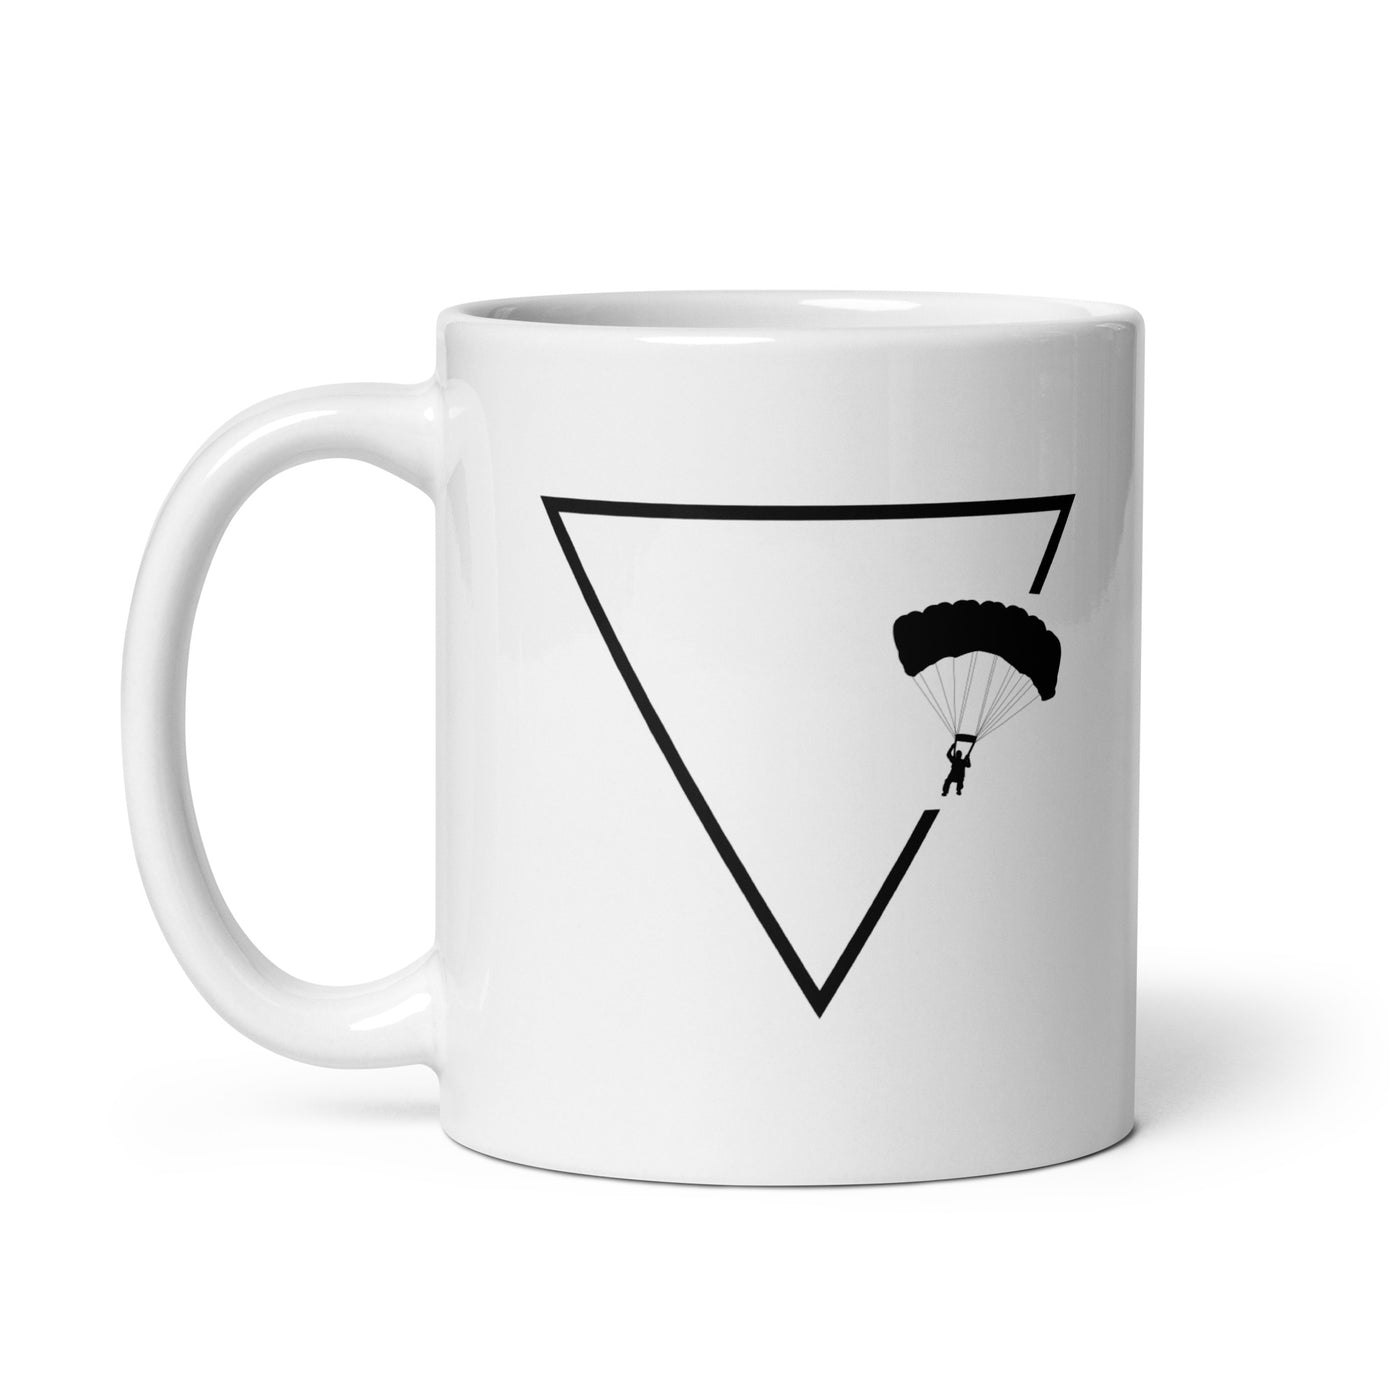 Triangle 1 And Paragliding - Tasse berge 11oz